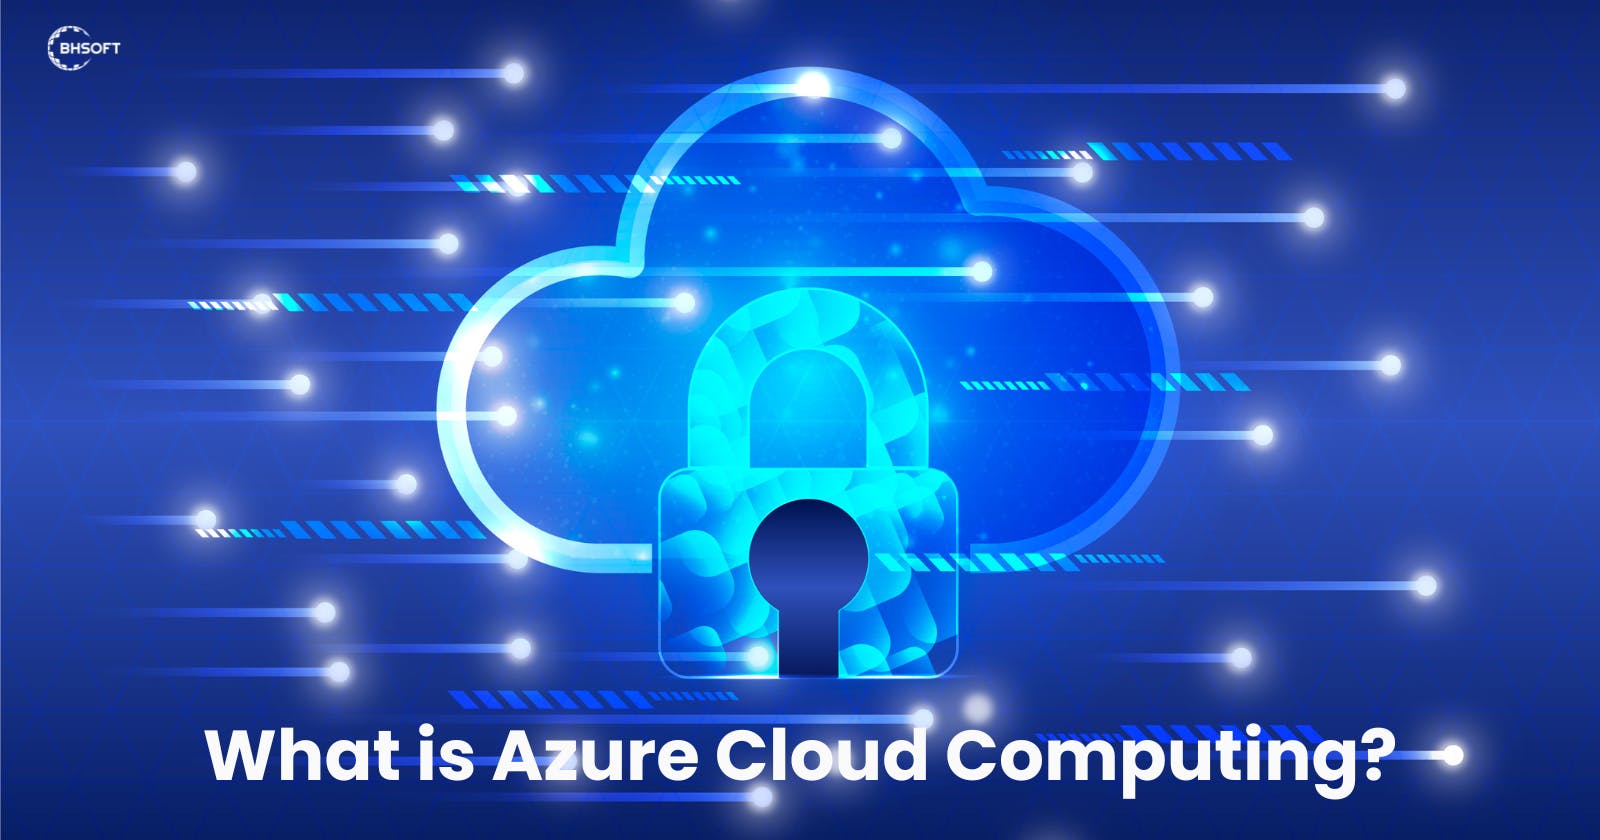 What is Azure Cloud Computing?